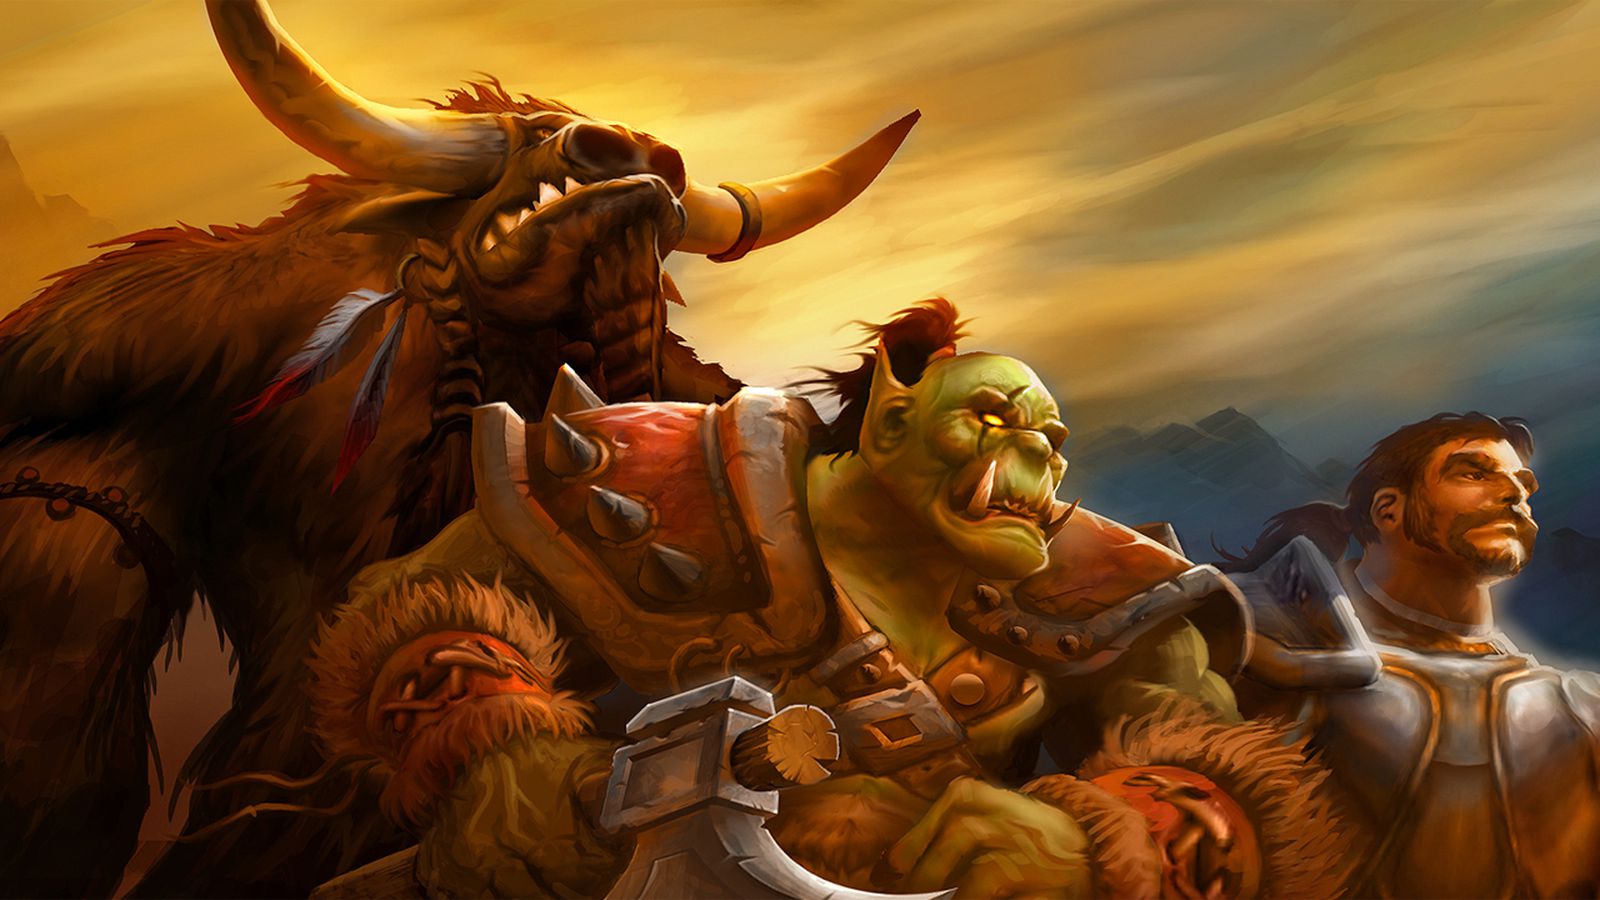 World of Warcraft Classic Launches Summer 2019, Included With Regular Subscription